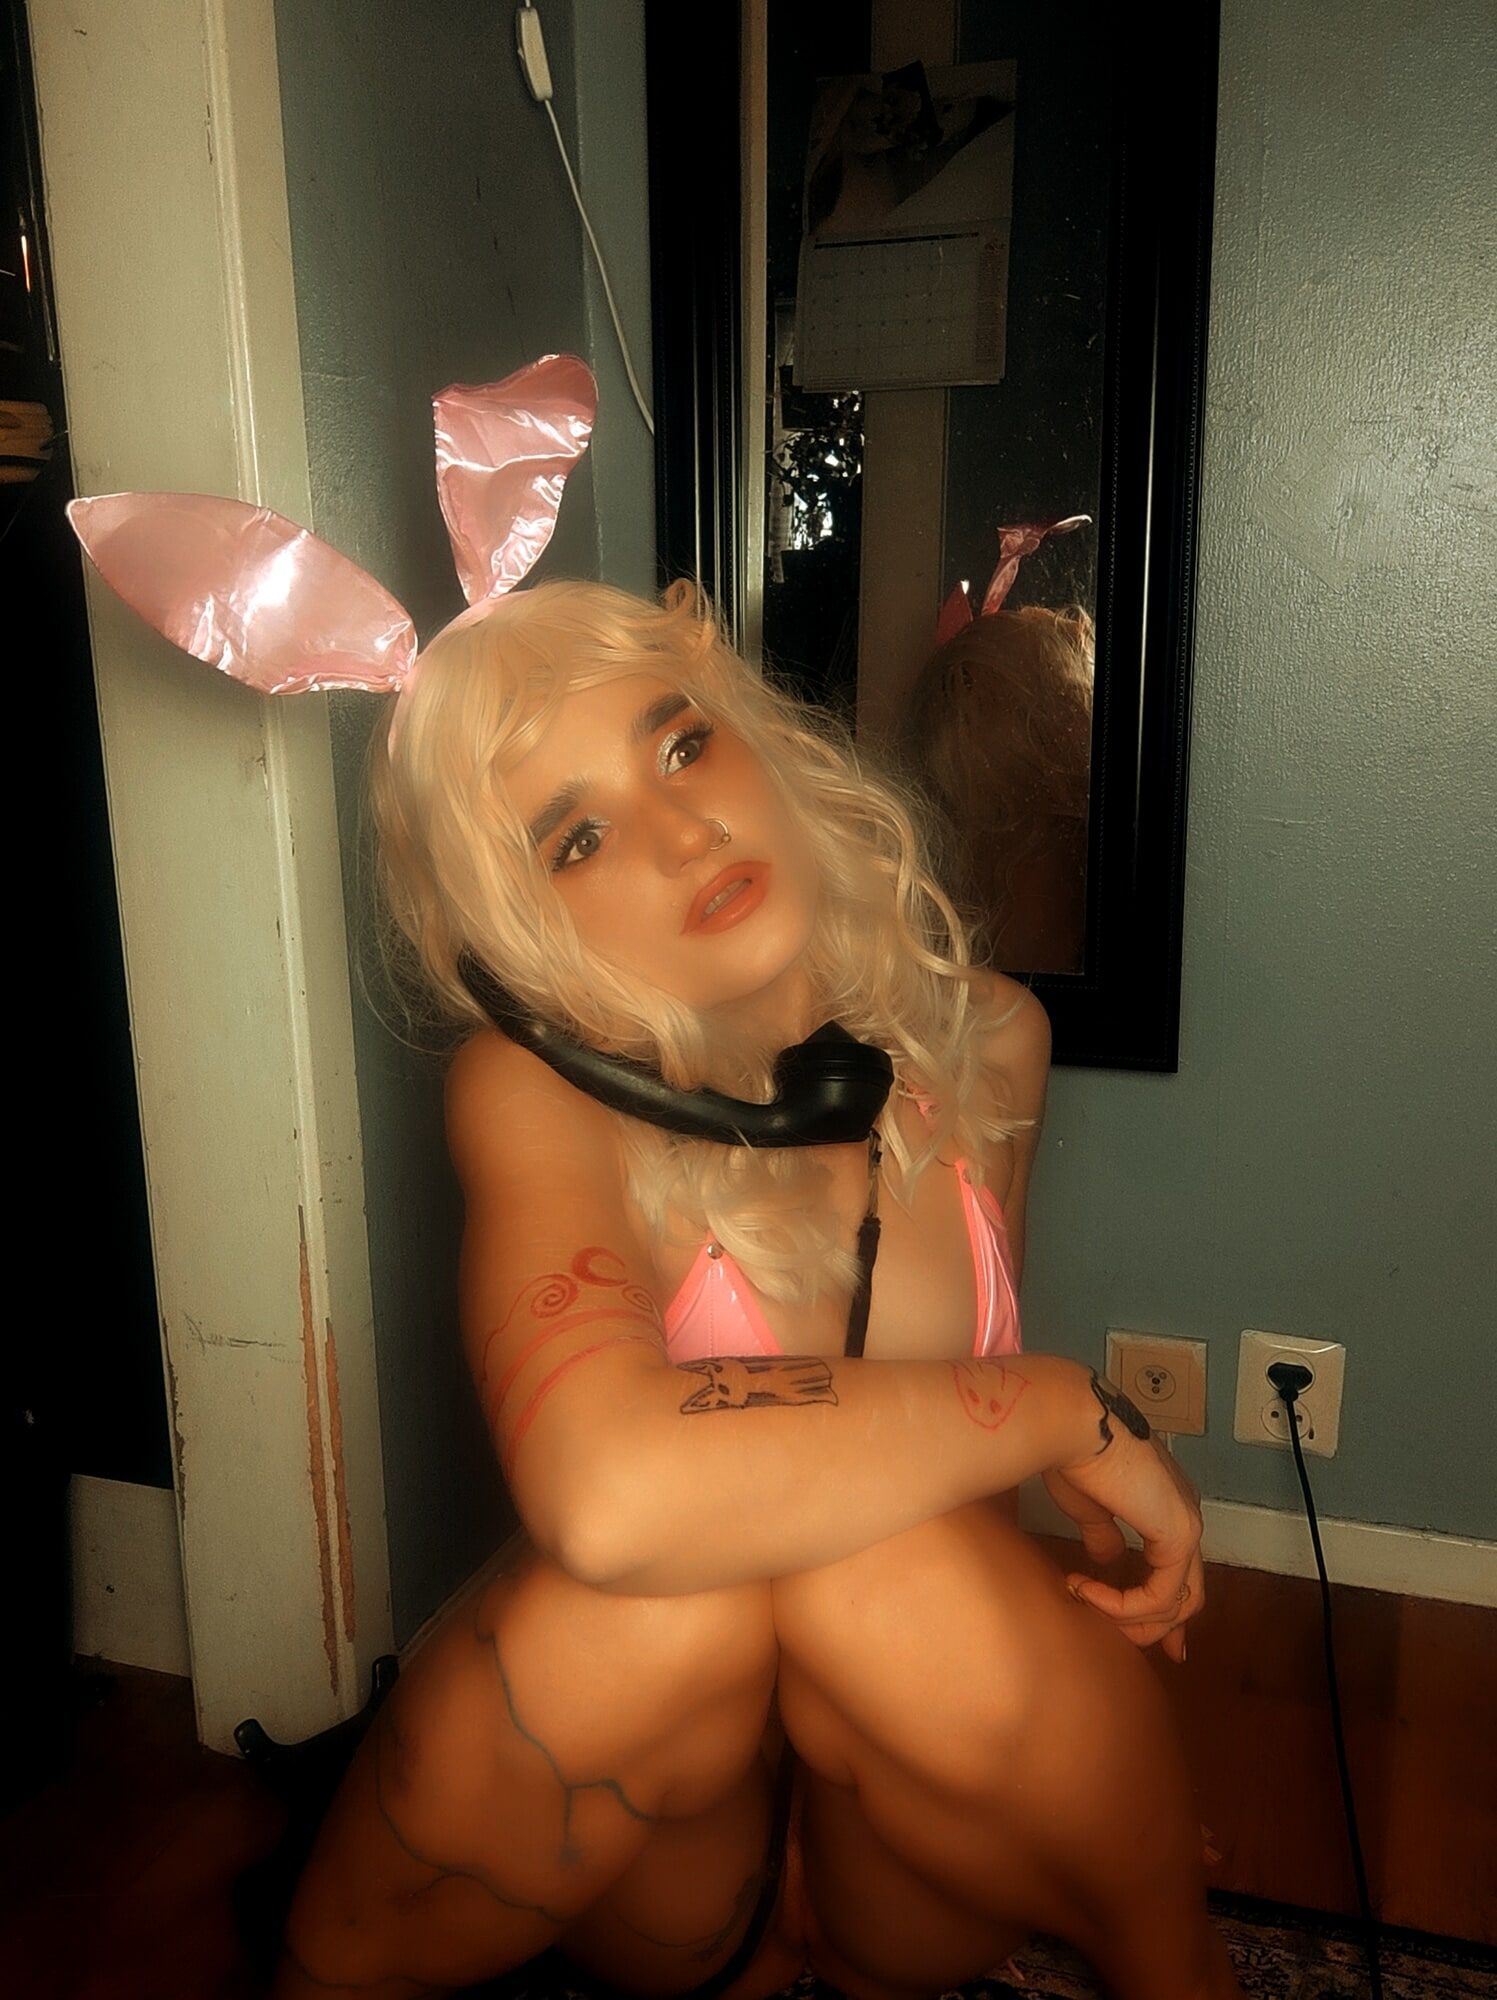 Pink bunny talking on the phone while showing off pussy #46